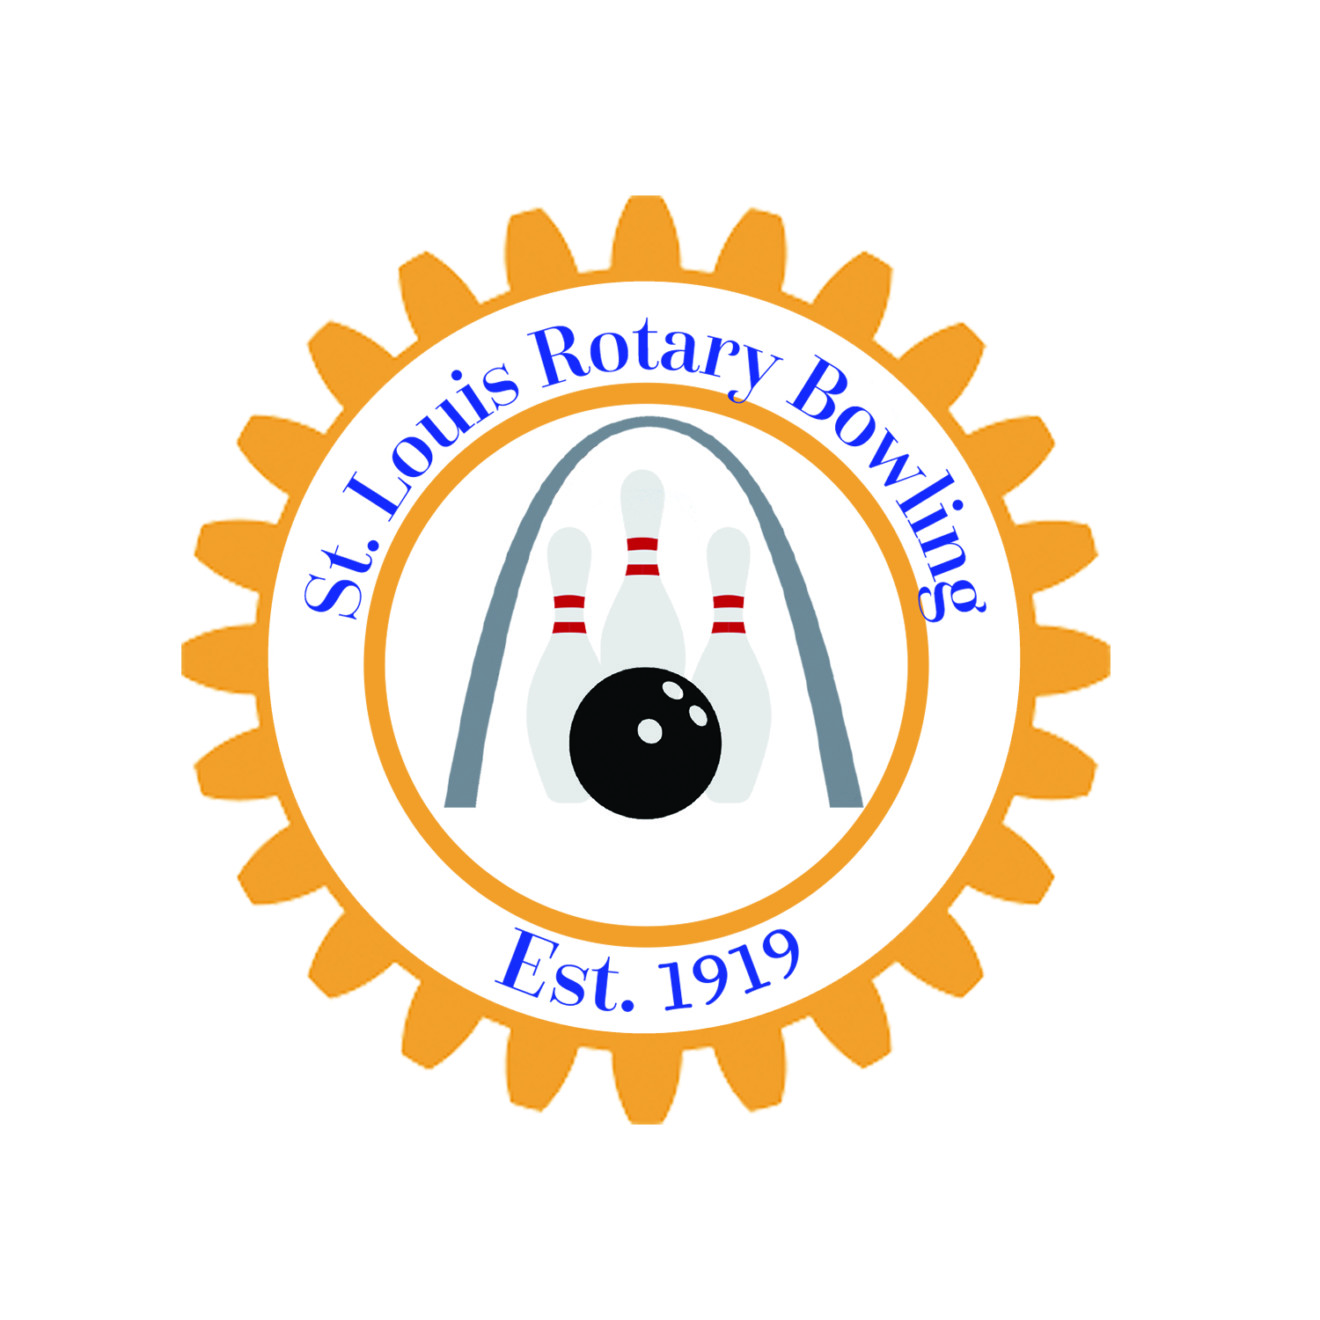 St Louis Rotary Bowling League ~ September 14, 2020